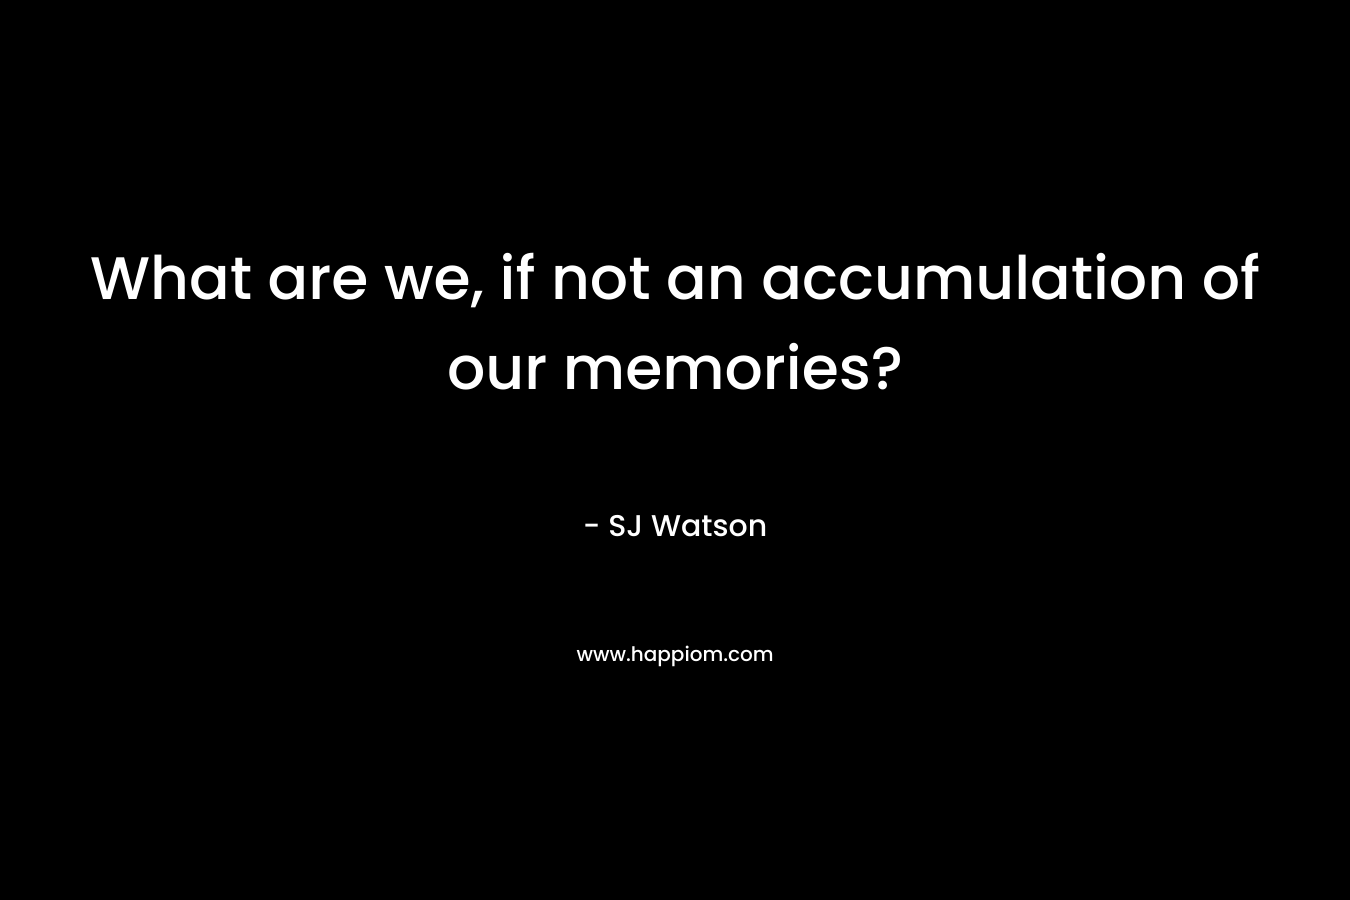 What are we, if not an accumulation of our memories?